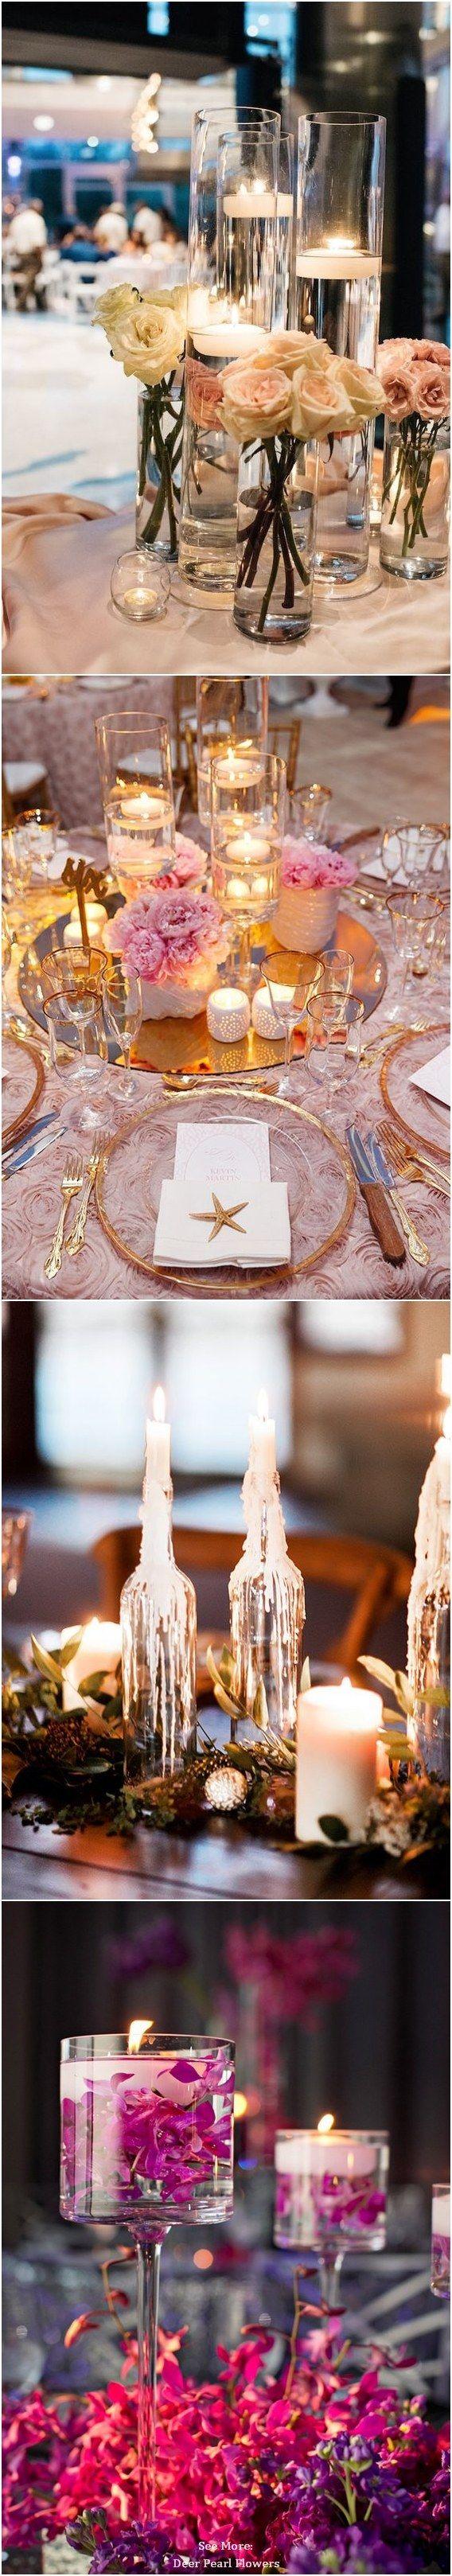 Mariage - 40 Chic Romantic Wedding Ideas Using Candles